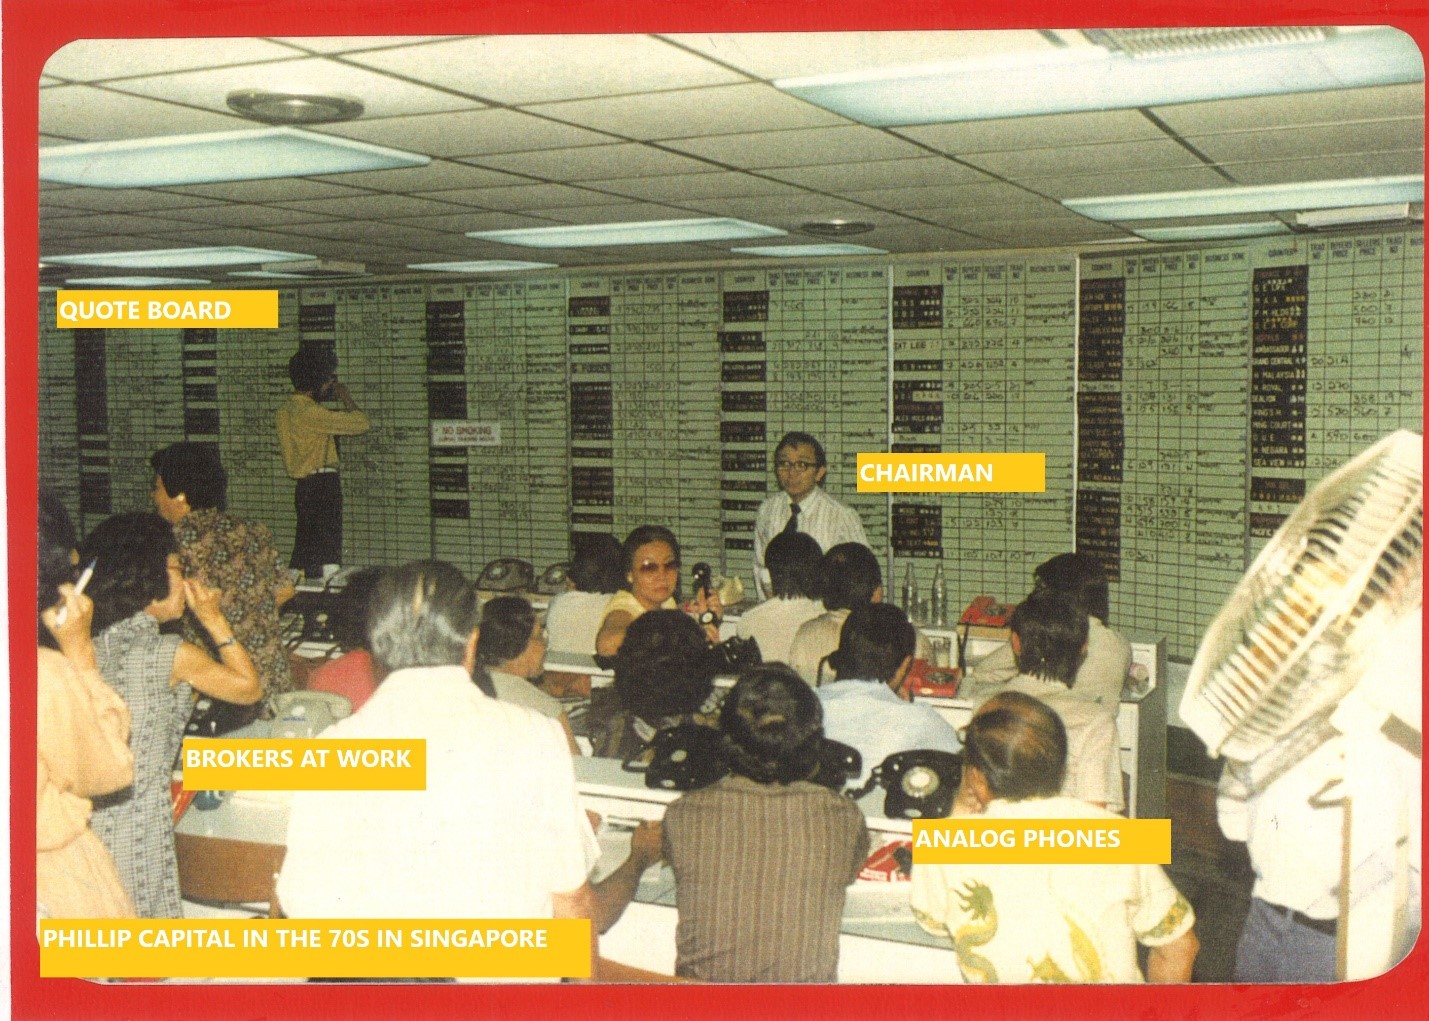 Image of Phillip Capital staff working in the office in the 1970s.  Tags on the image label the Chairman, the quote board, brokers at work, and analog phones.